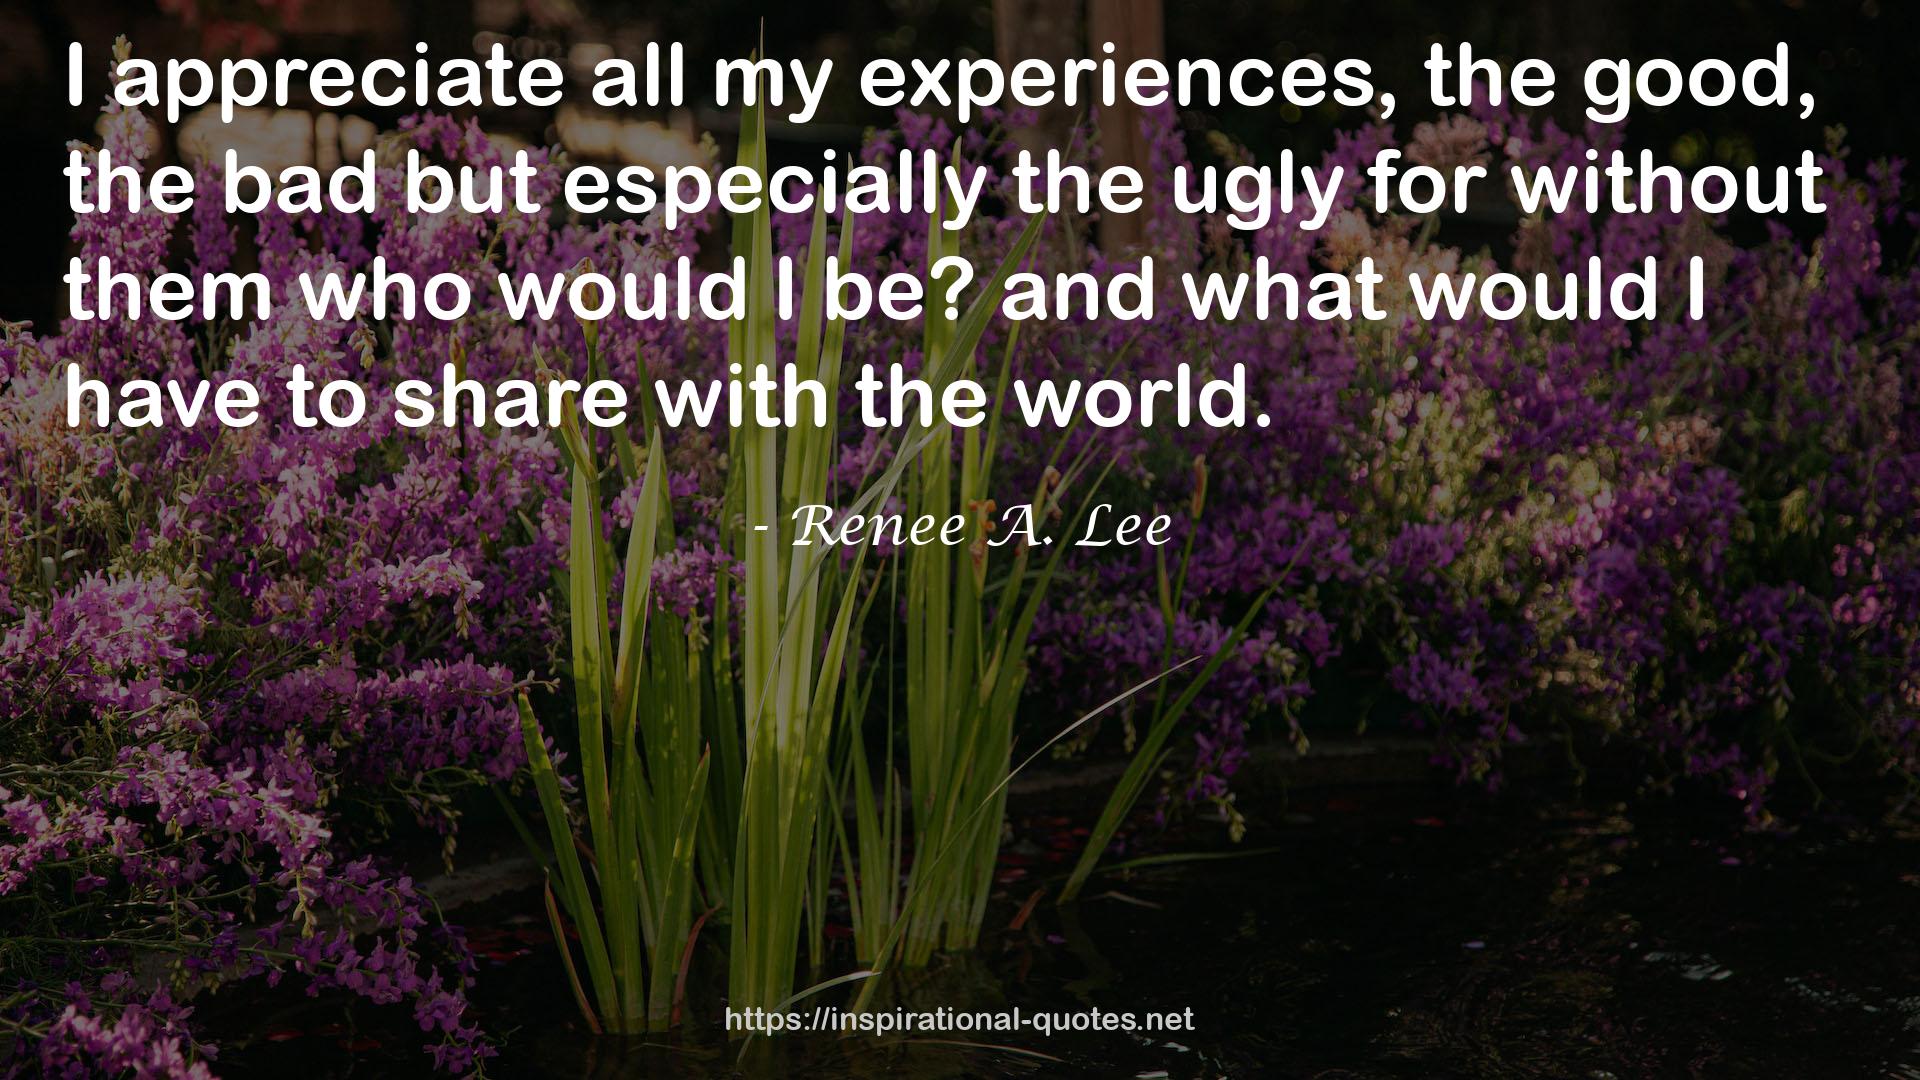 Renee A. Lee QUOTES